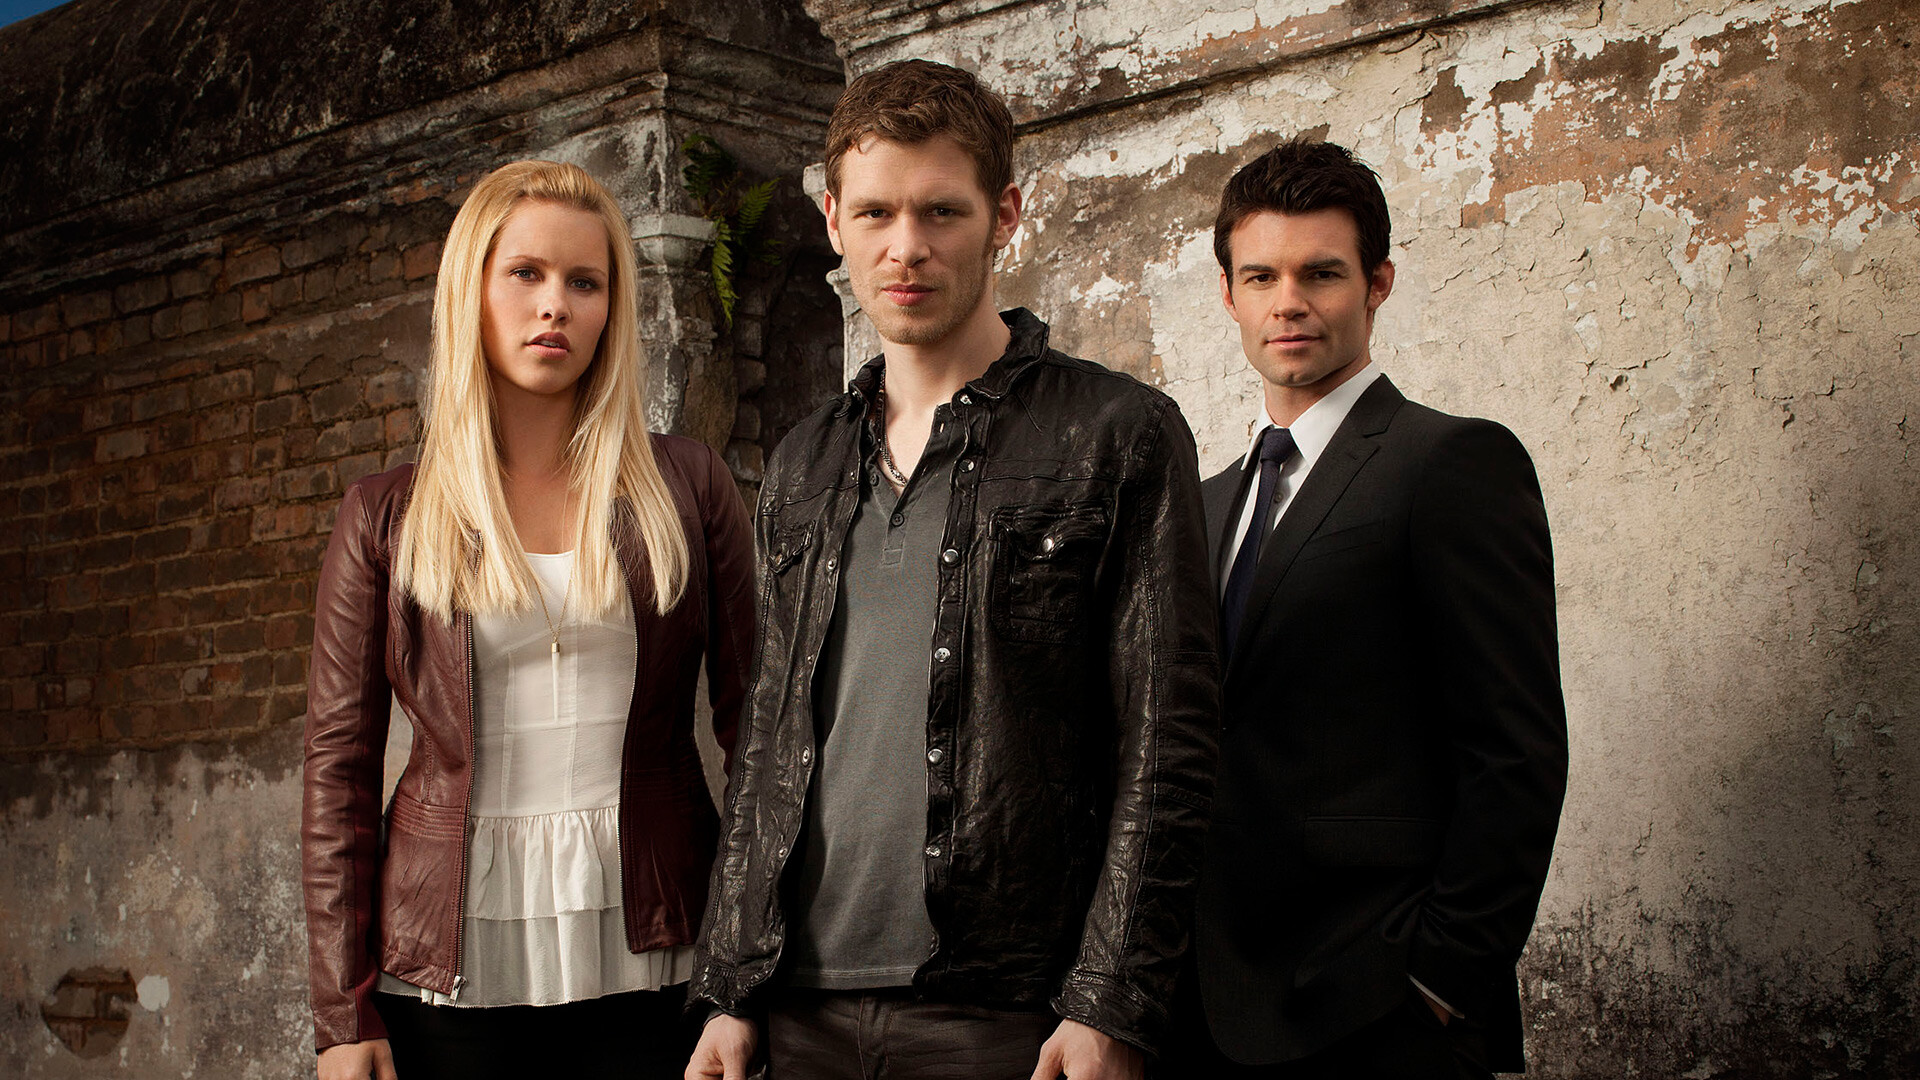 The Originals (TV Series): Joseph Morgan, Daniel Gillies, Michelle Grigg, A spin-off of The Vampire Diaries. 1920x1080 Full HD Background.